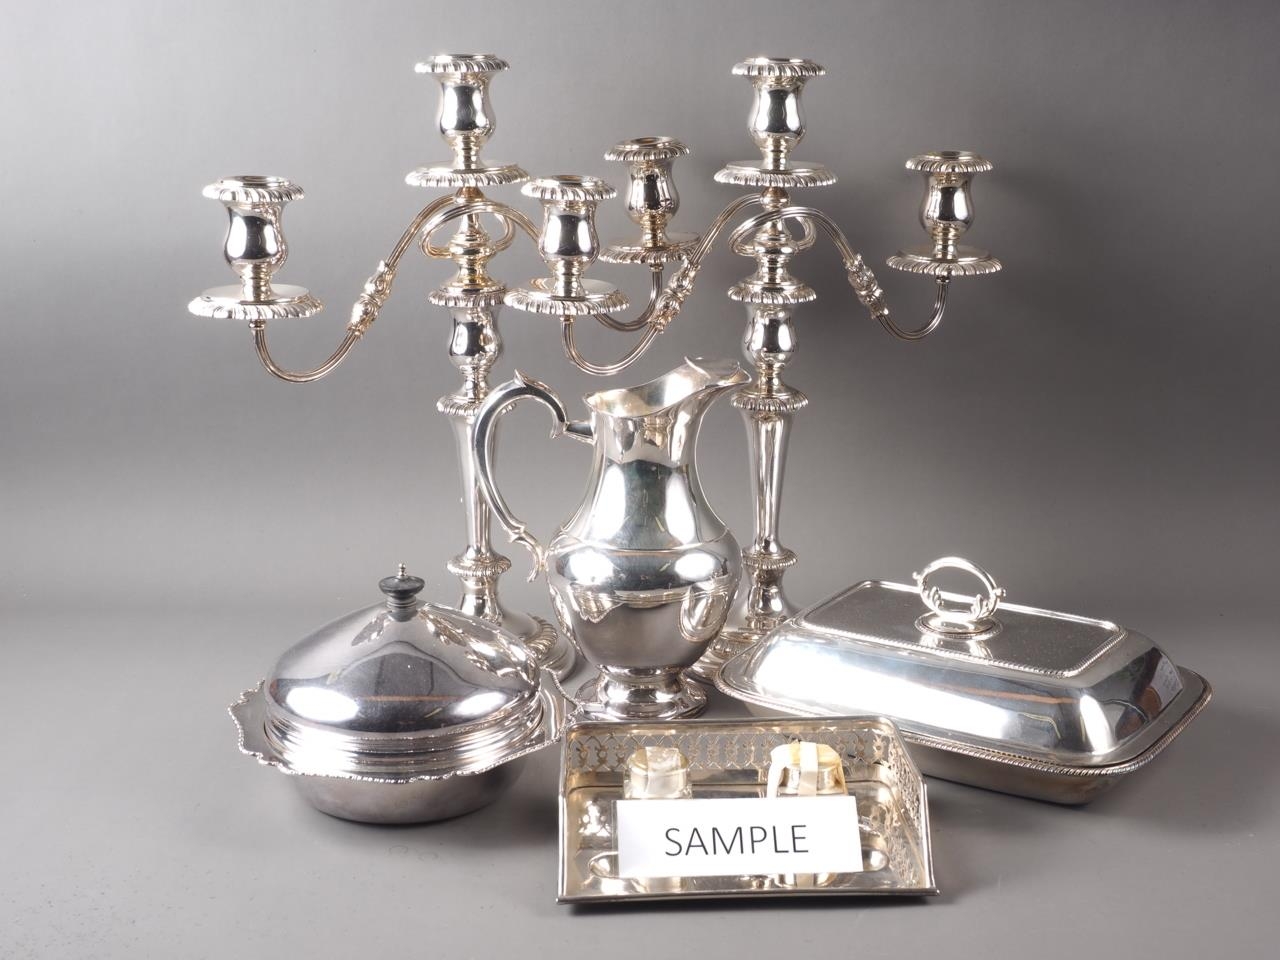 A pair of silver plated three-light table candelabra, a pair of single light candlesticks, a